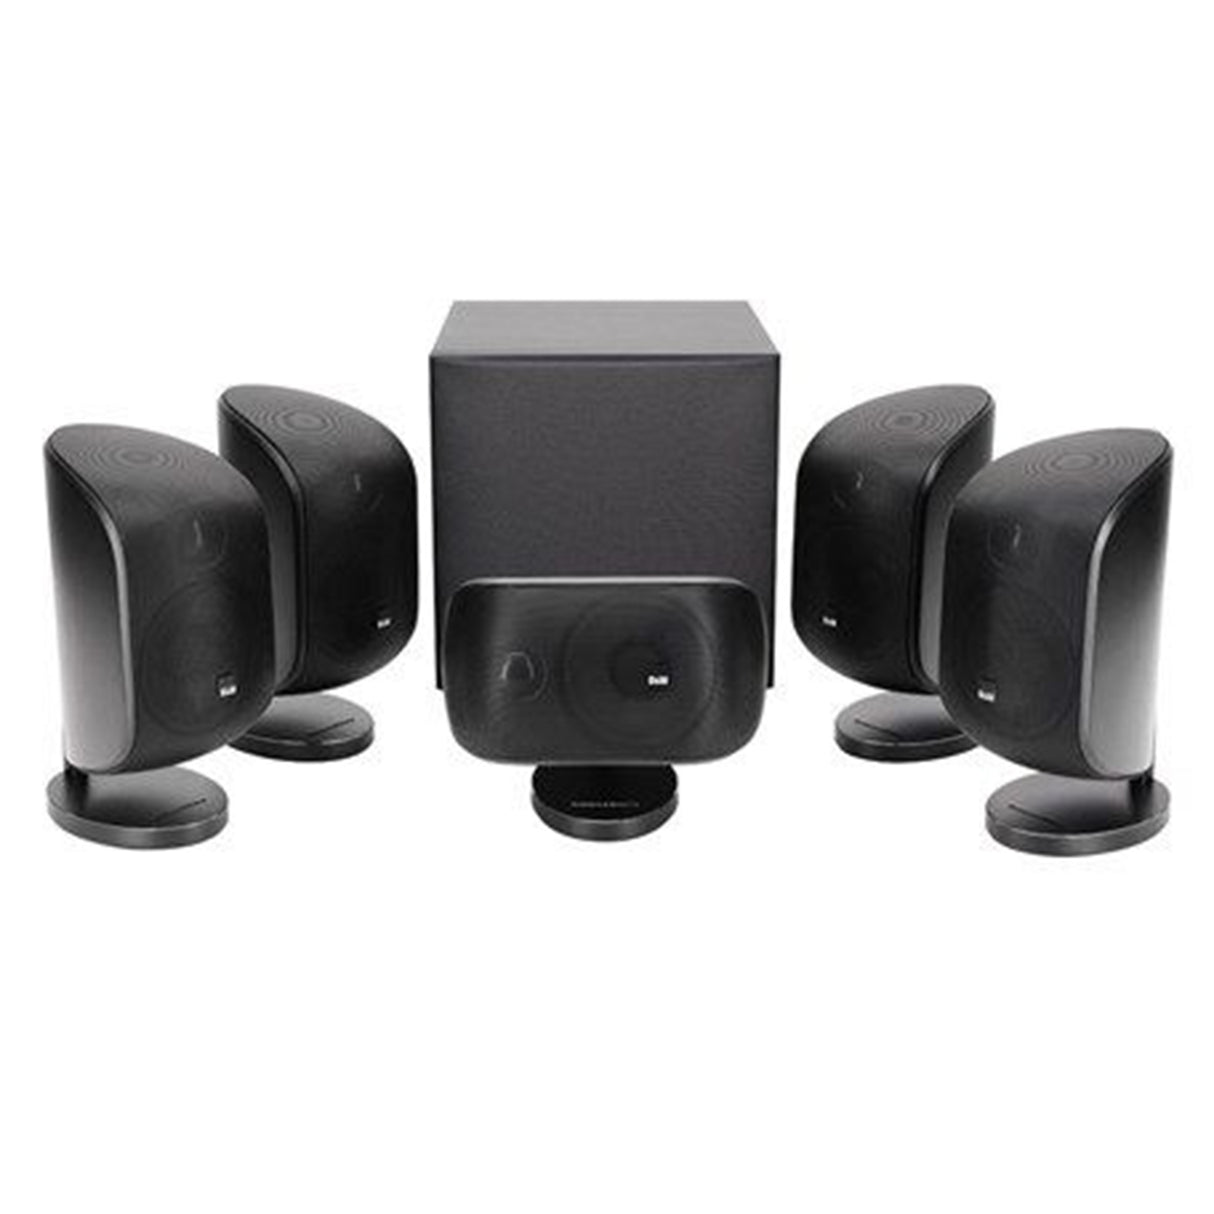 Bowers & Wilkins MT-50D 5.1 Channel Speaker Package with ASW608 Powered Subwoofer